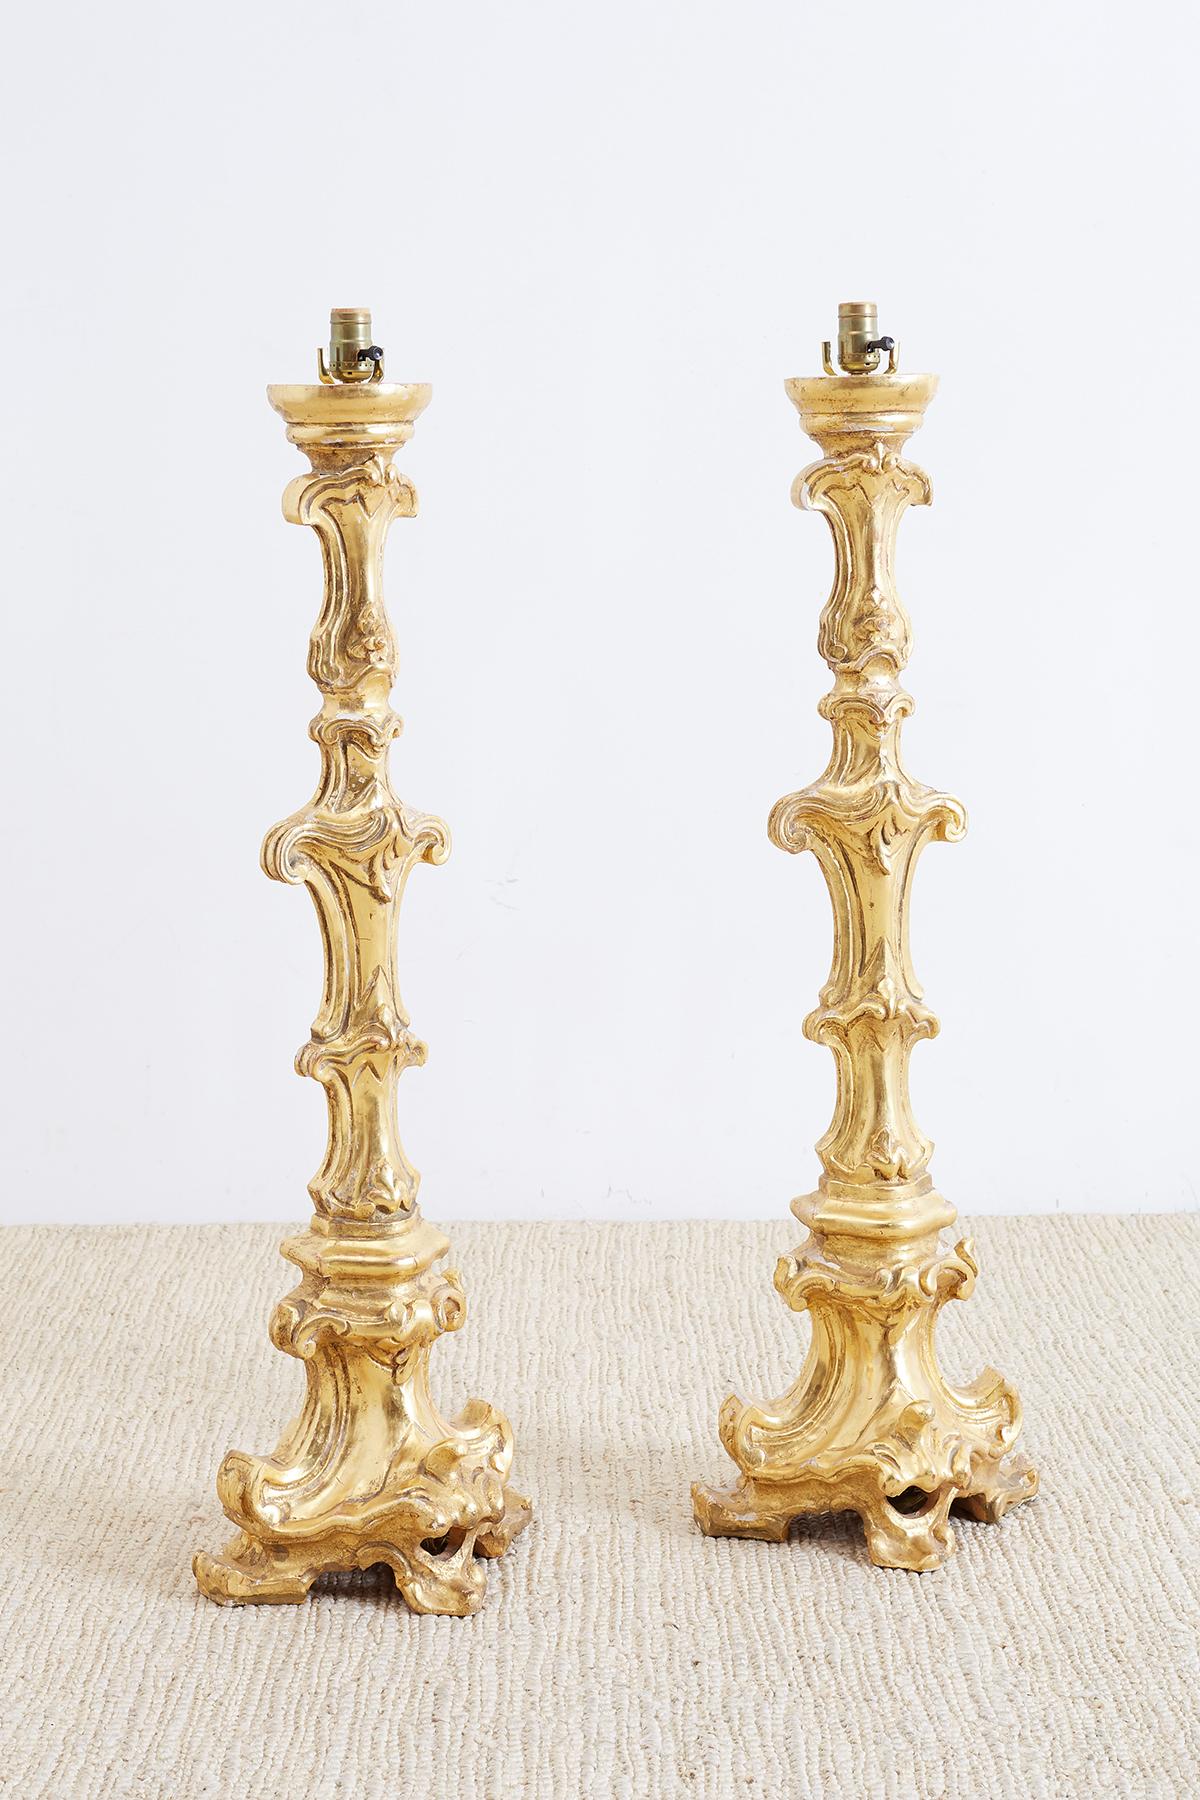 Stunning pair of Italian giltwood pricket stick or candlestick lamps made in the Rococo taste. Featuring ornately carved pricket altar sticks withs scrolls and fleur de lis decoration converted to lamps. Beautiful gold leaf finish with expected